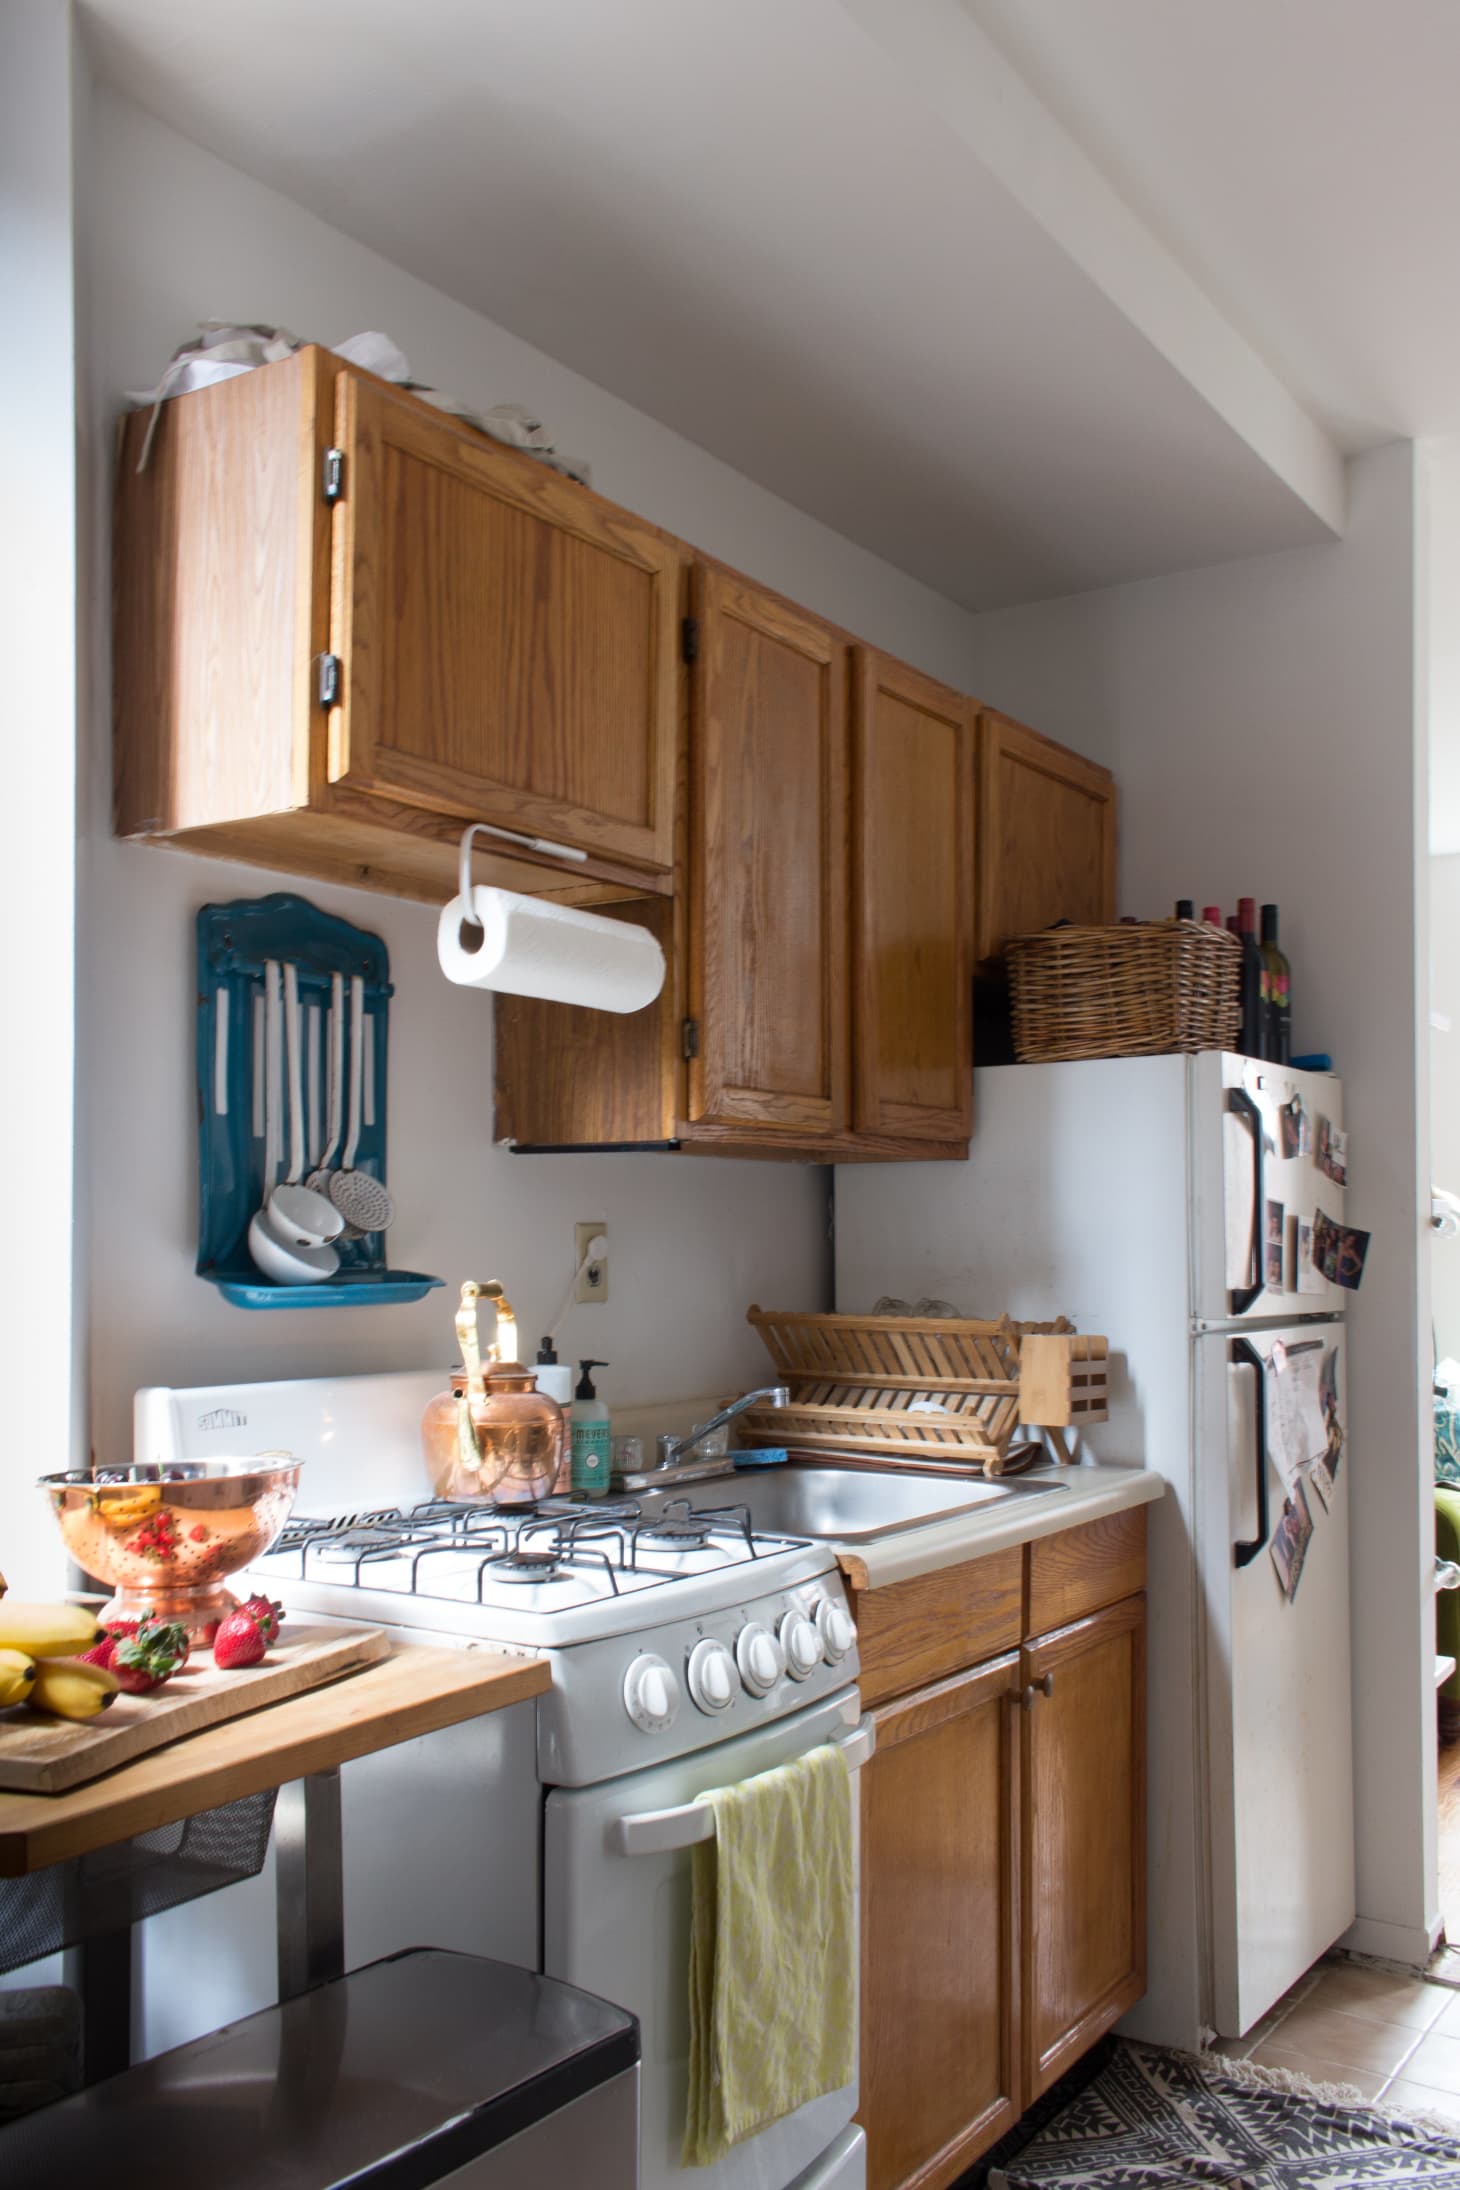 4 Pro Designers Share Their Best Tricks for Improving a Rental Kitchen